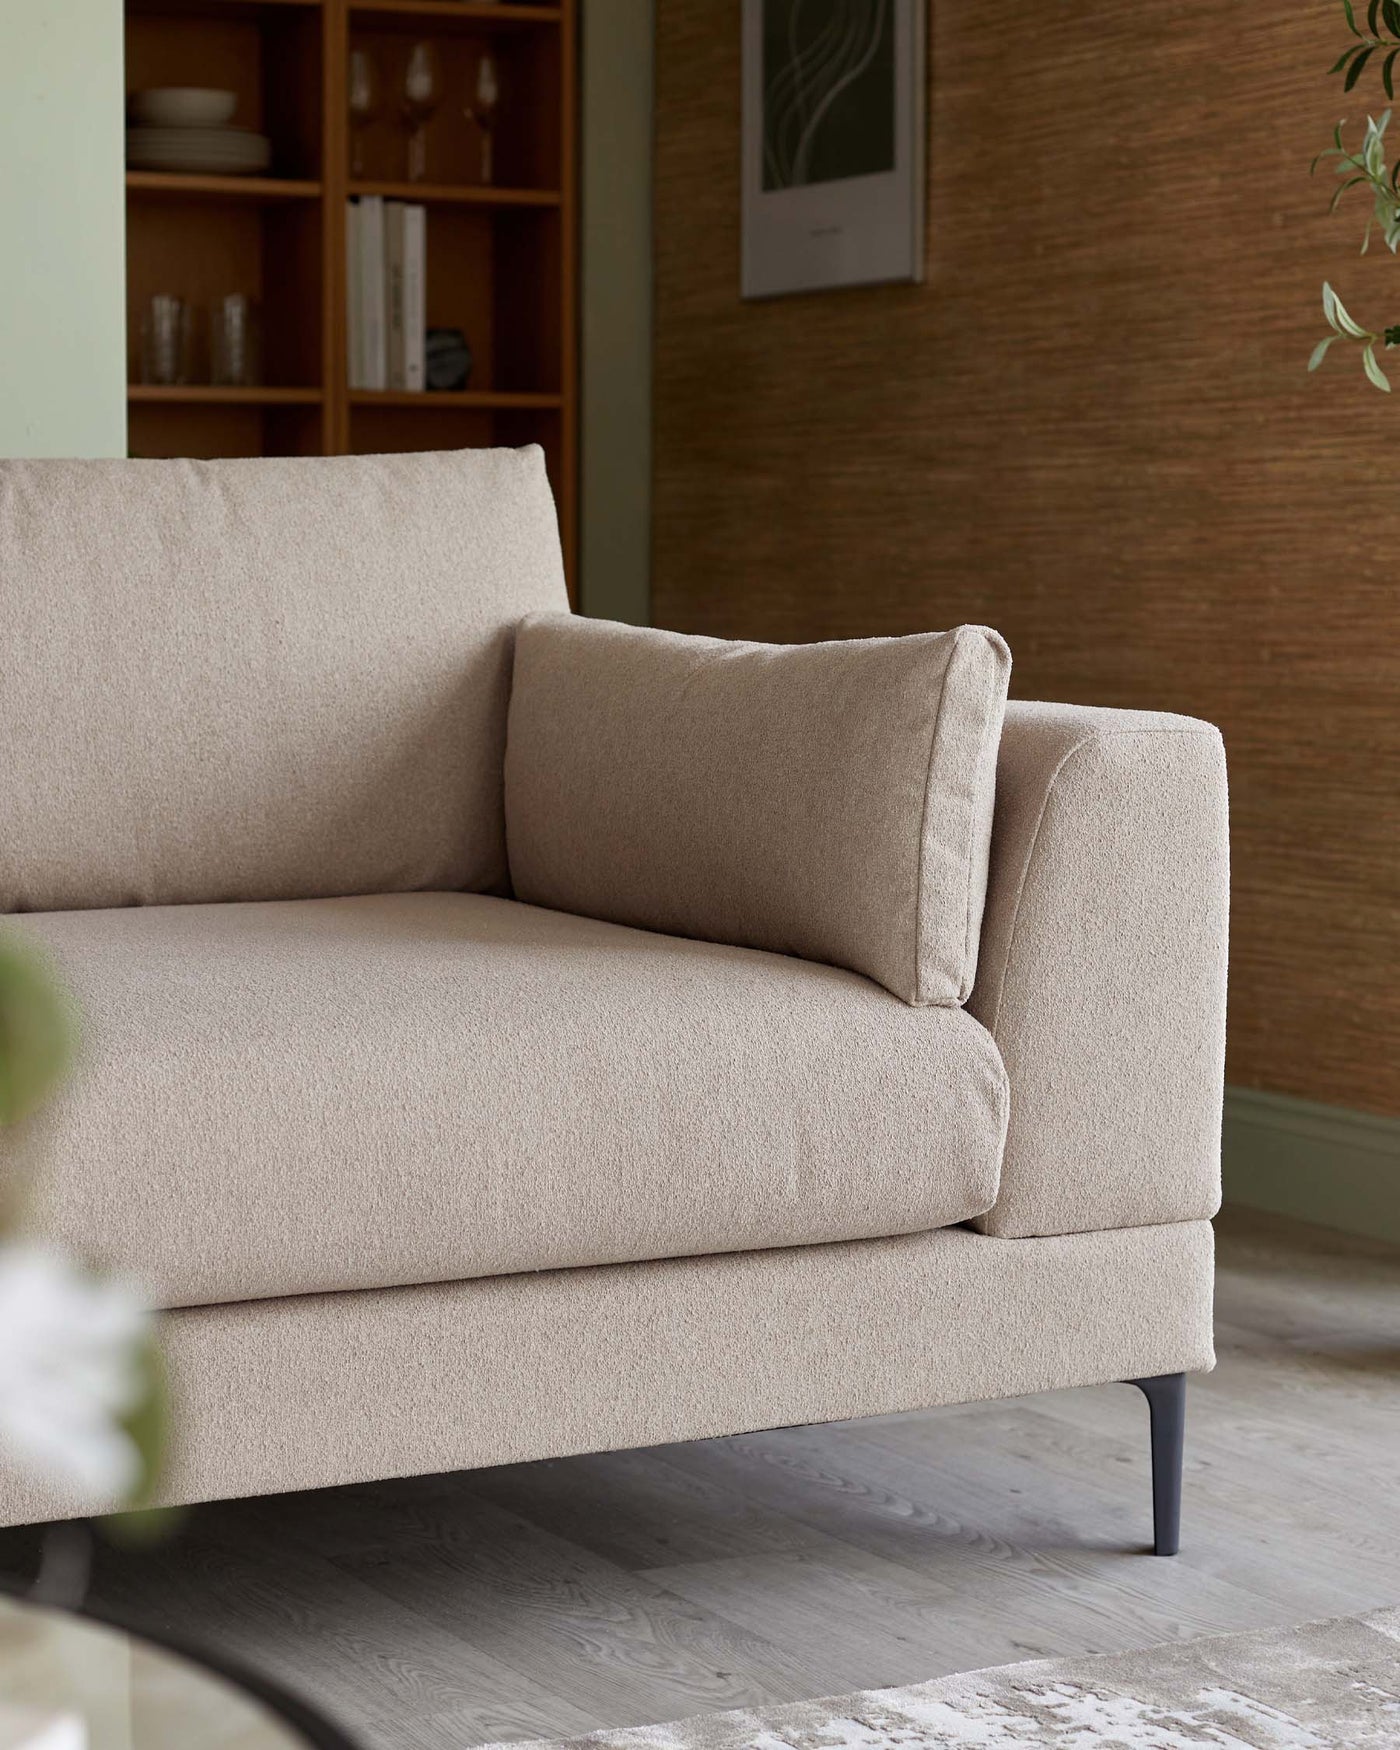 A contemporary beige sofa with a minimalistic design, featuring a smooth fabric finish, plush back cushion, and a single side cushion. The couch has a clean-lined silhouette and stands on slender, tapered dark legs, situated in a room with a wooden cabinet and artwork in the background.